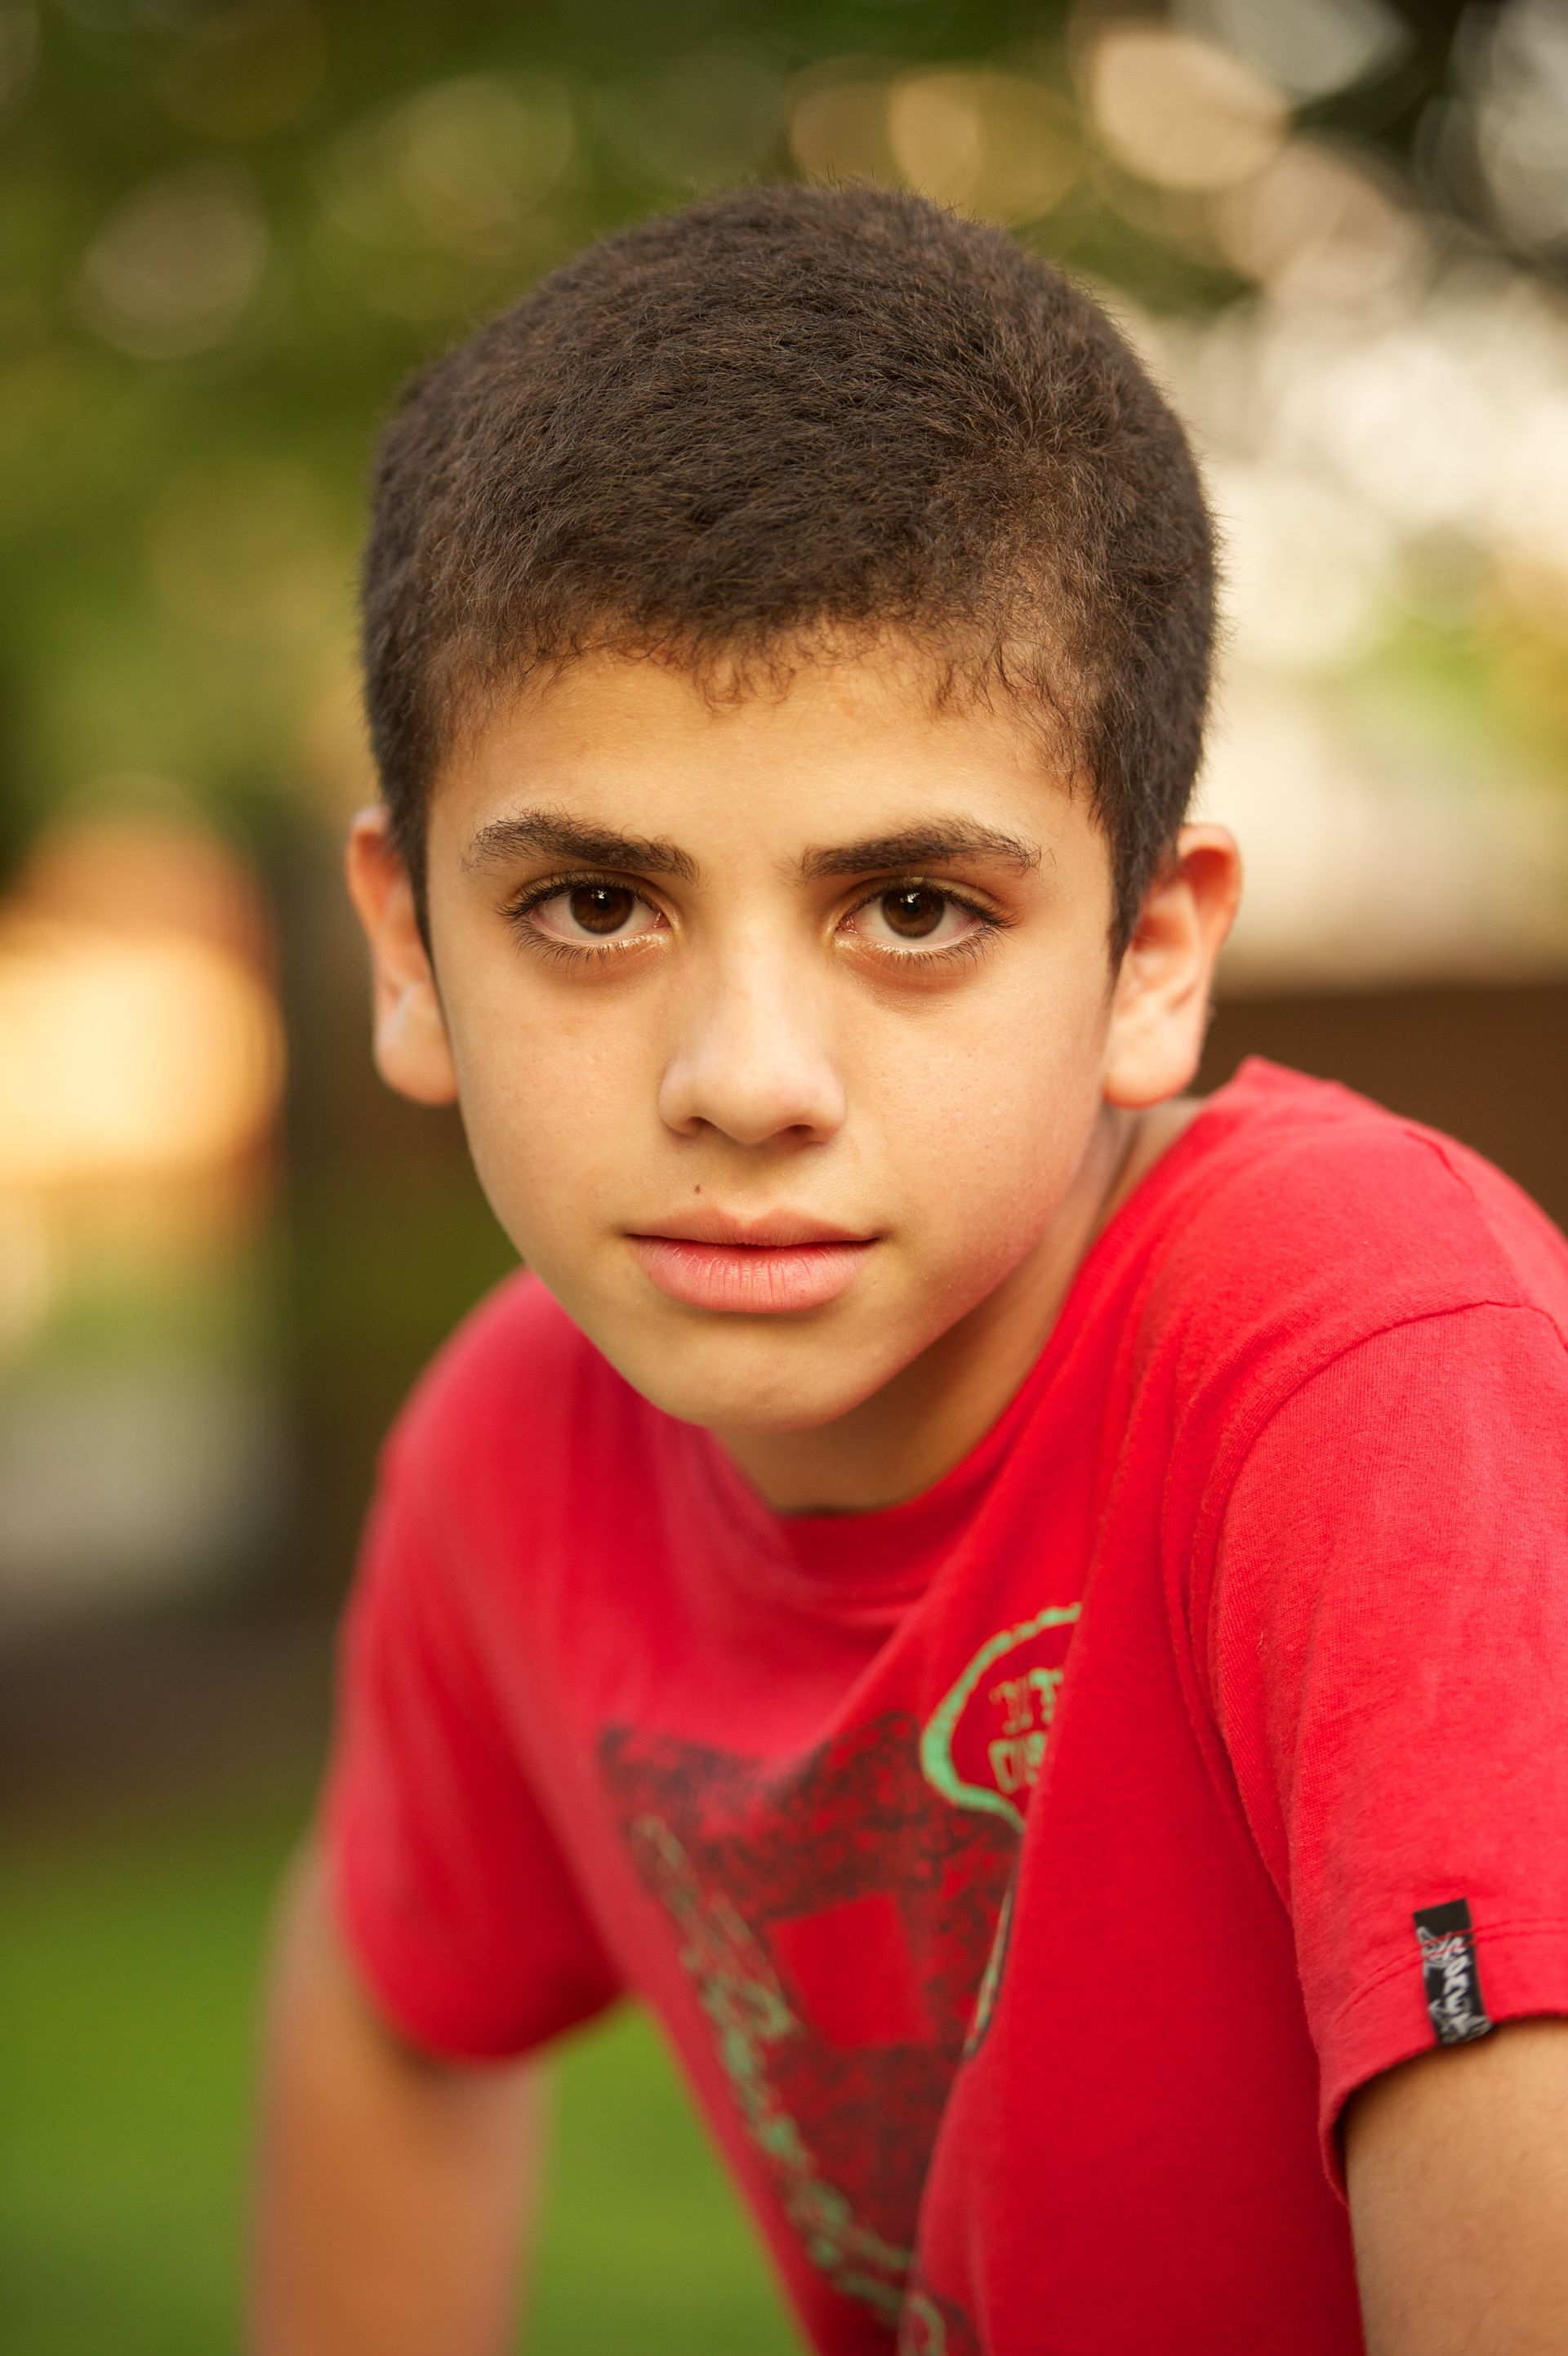 A portrait of a young boy in Argentina.